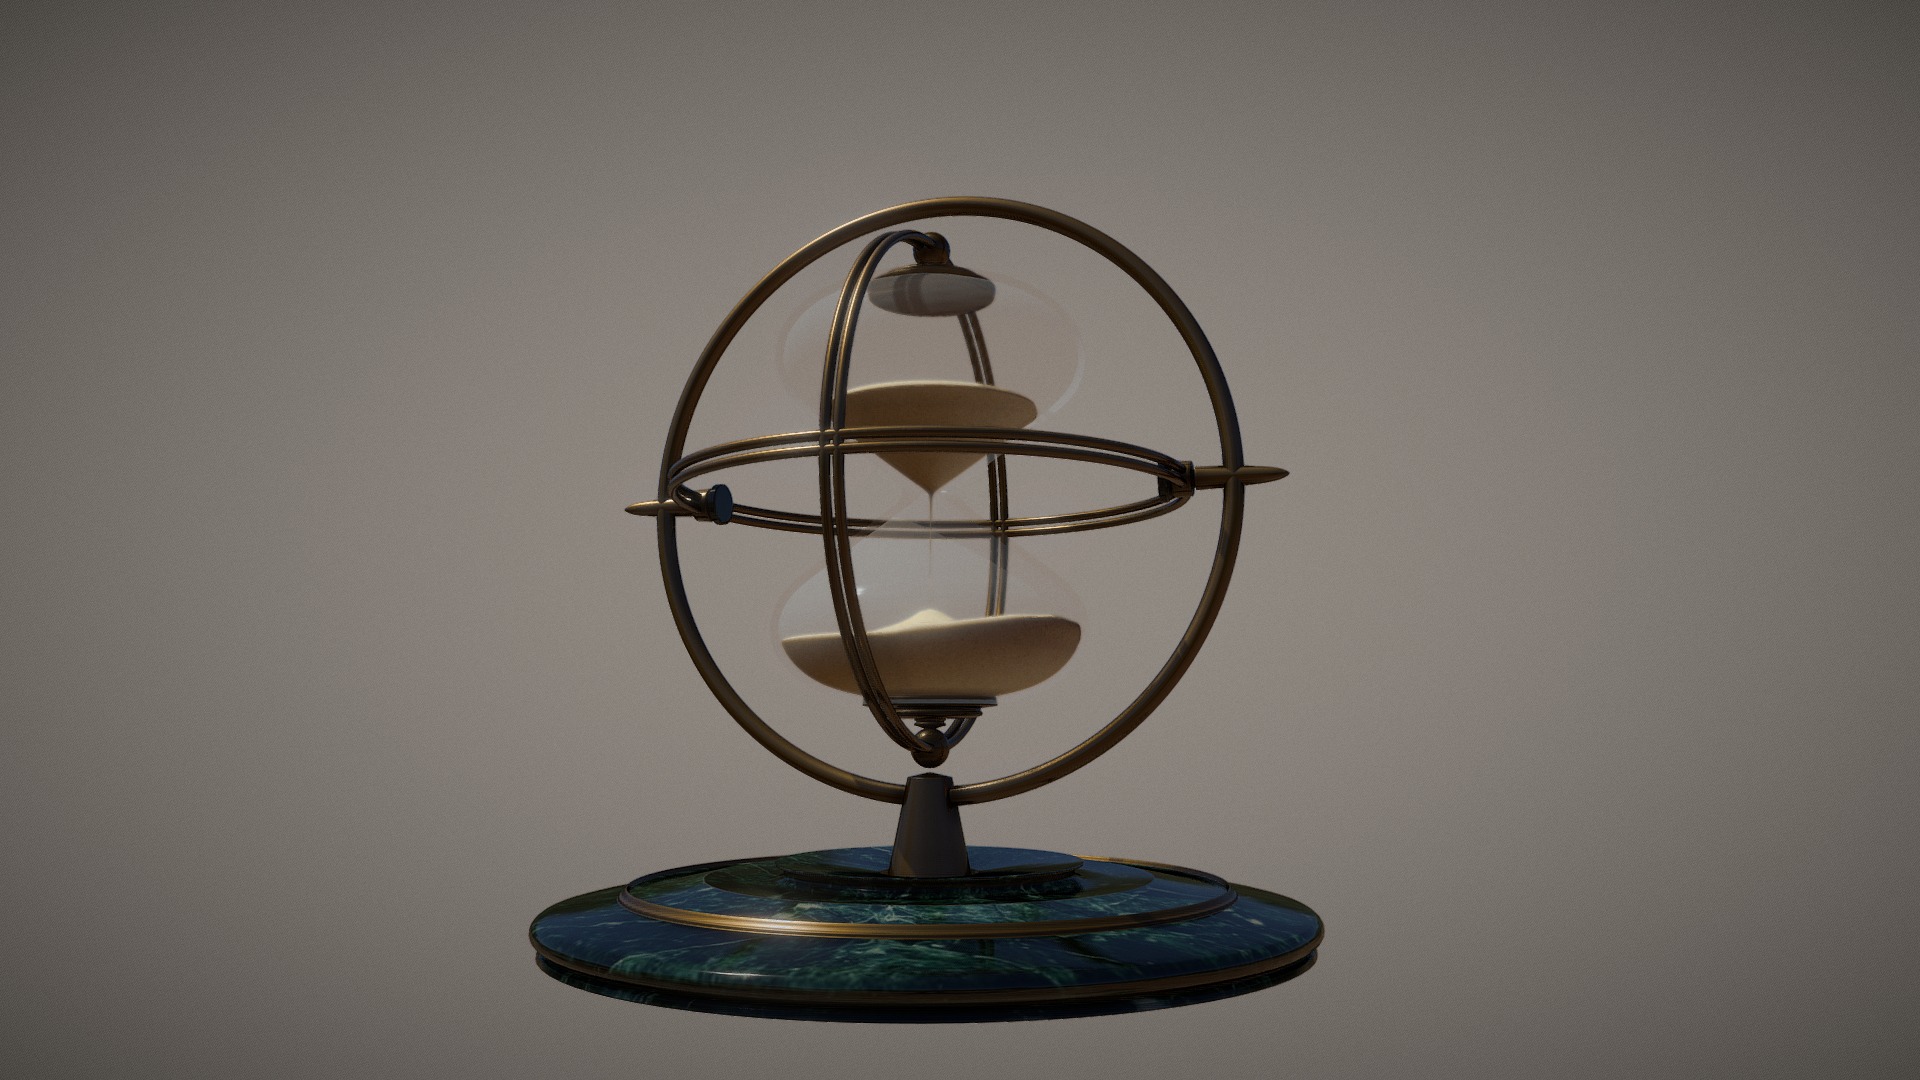 3D model Steampunk hourglass - This is a 3D model of the Steampunk hourglass. The 3D model is about a basketball hoop on a white background.